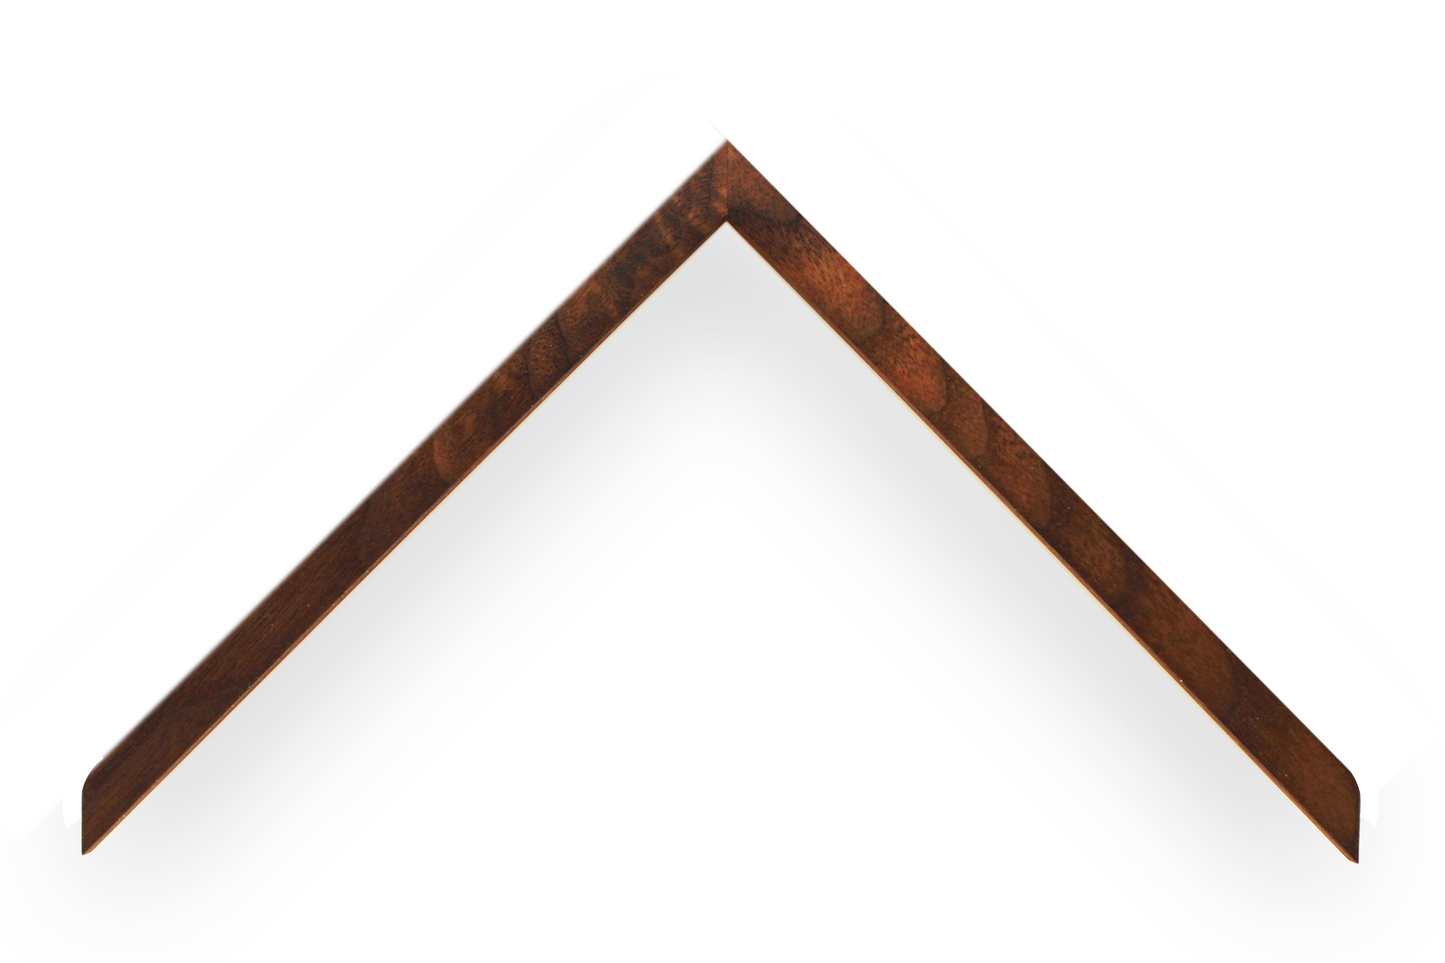 High-quality Walnut picture frame